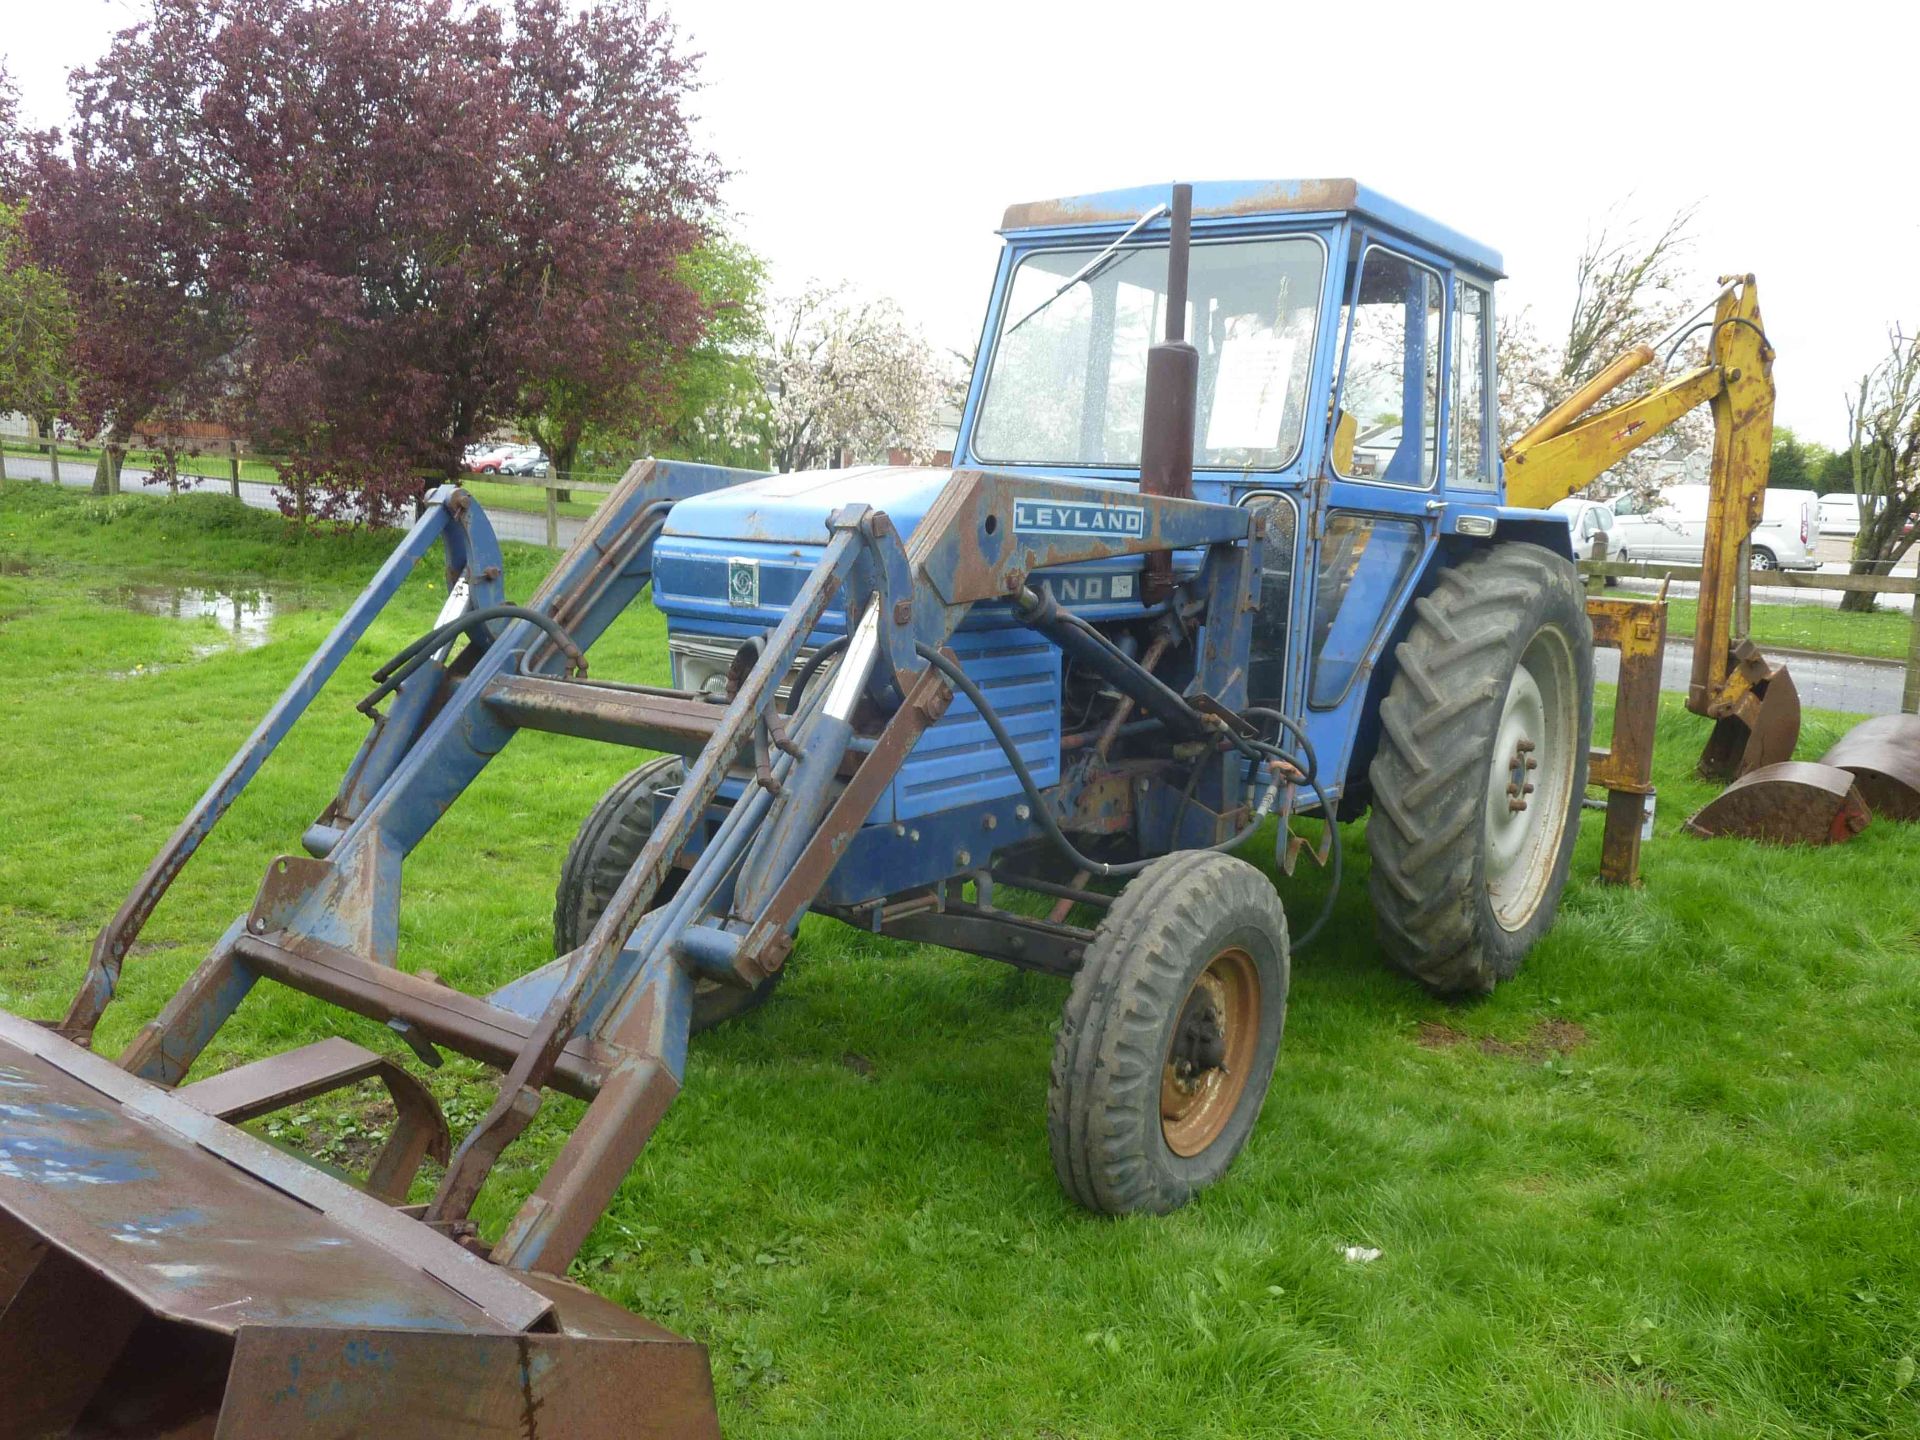 5238  Leyland 384 tractor with loader and back actor, 1 owner - Image 3 of 4